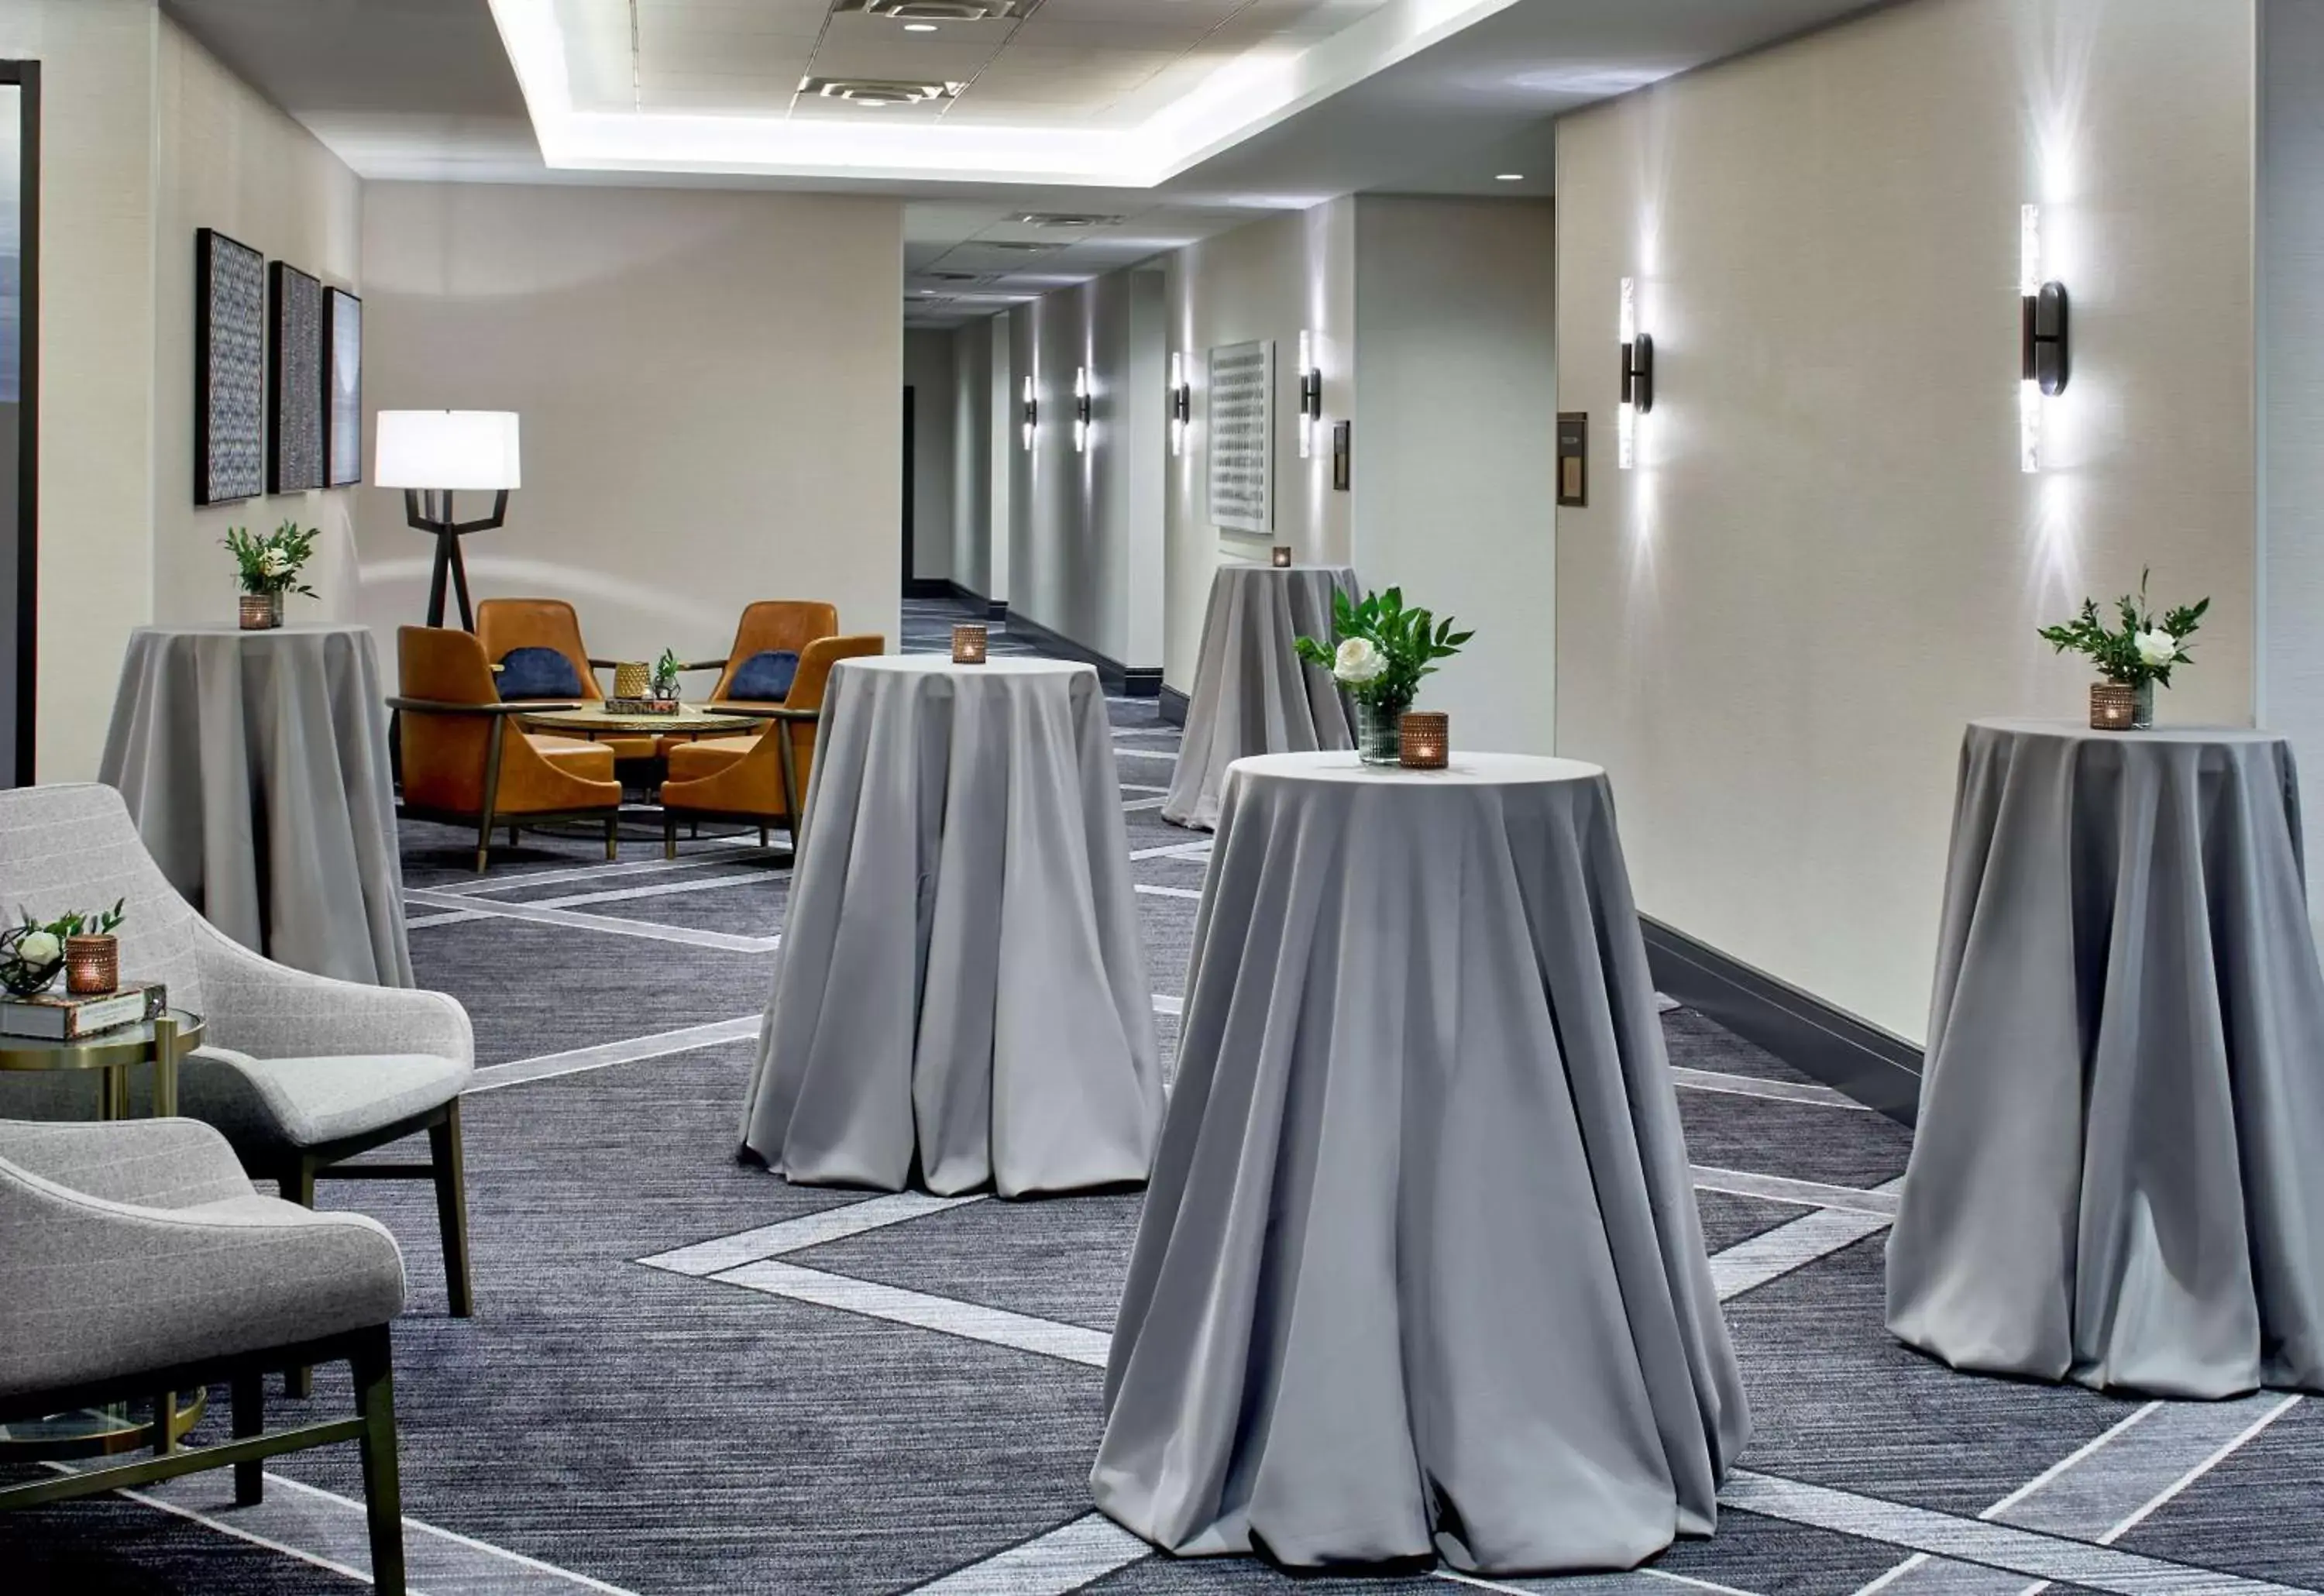 Meeting/conference room, Banquet Facilities in Cumberland House Knoxville, Tapestry Collection by Hilton